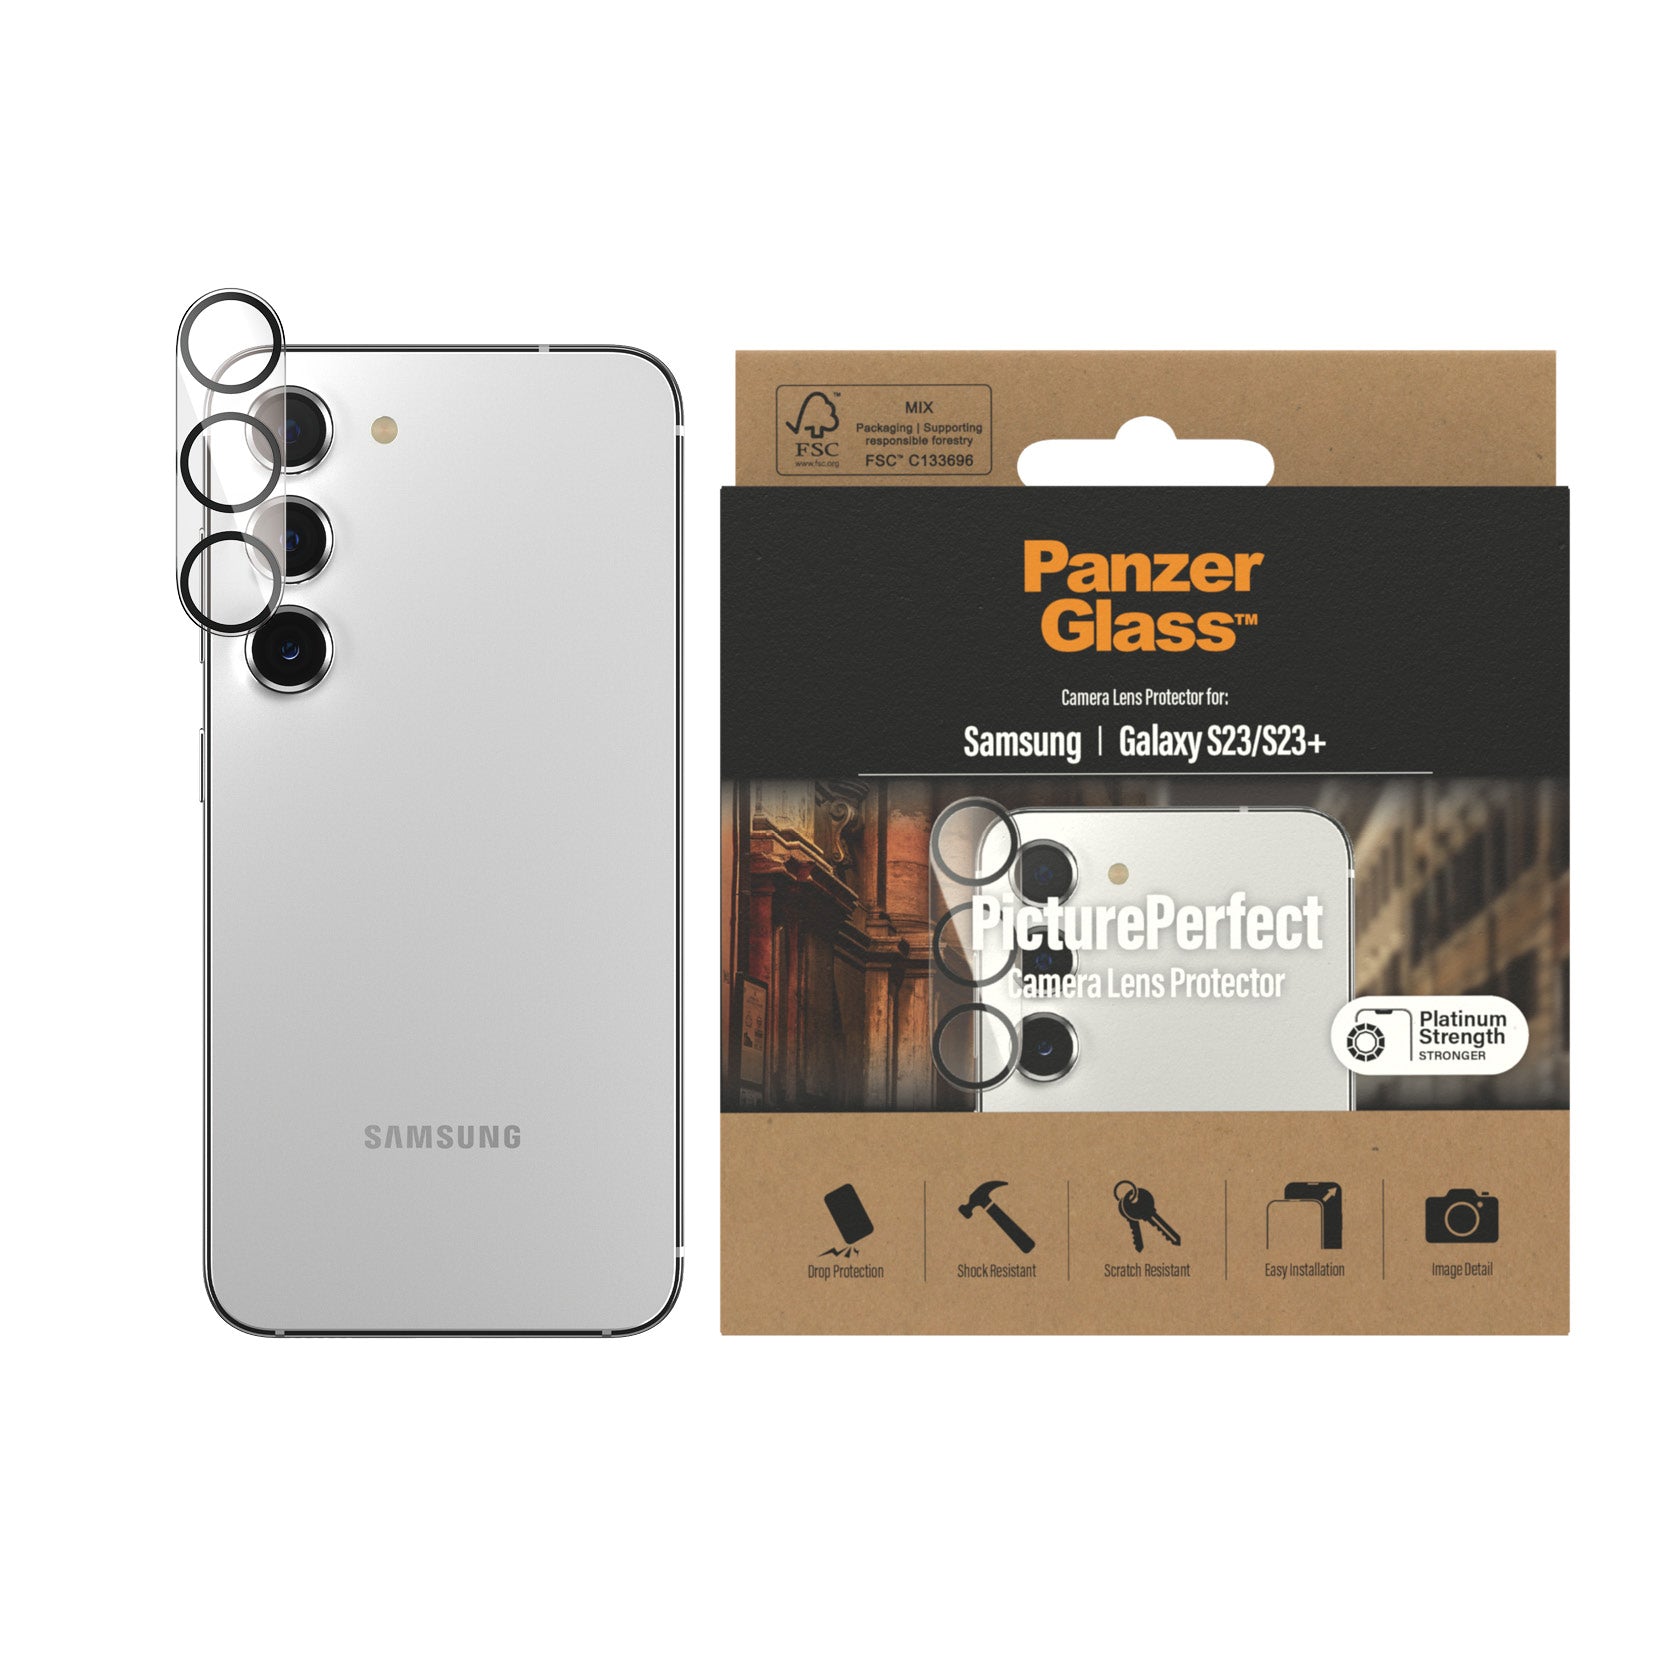 PanzerGlass™ PicturePerfect Camera Lens Protector for Samsung Galaxy S23 and S23+.